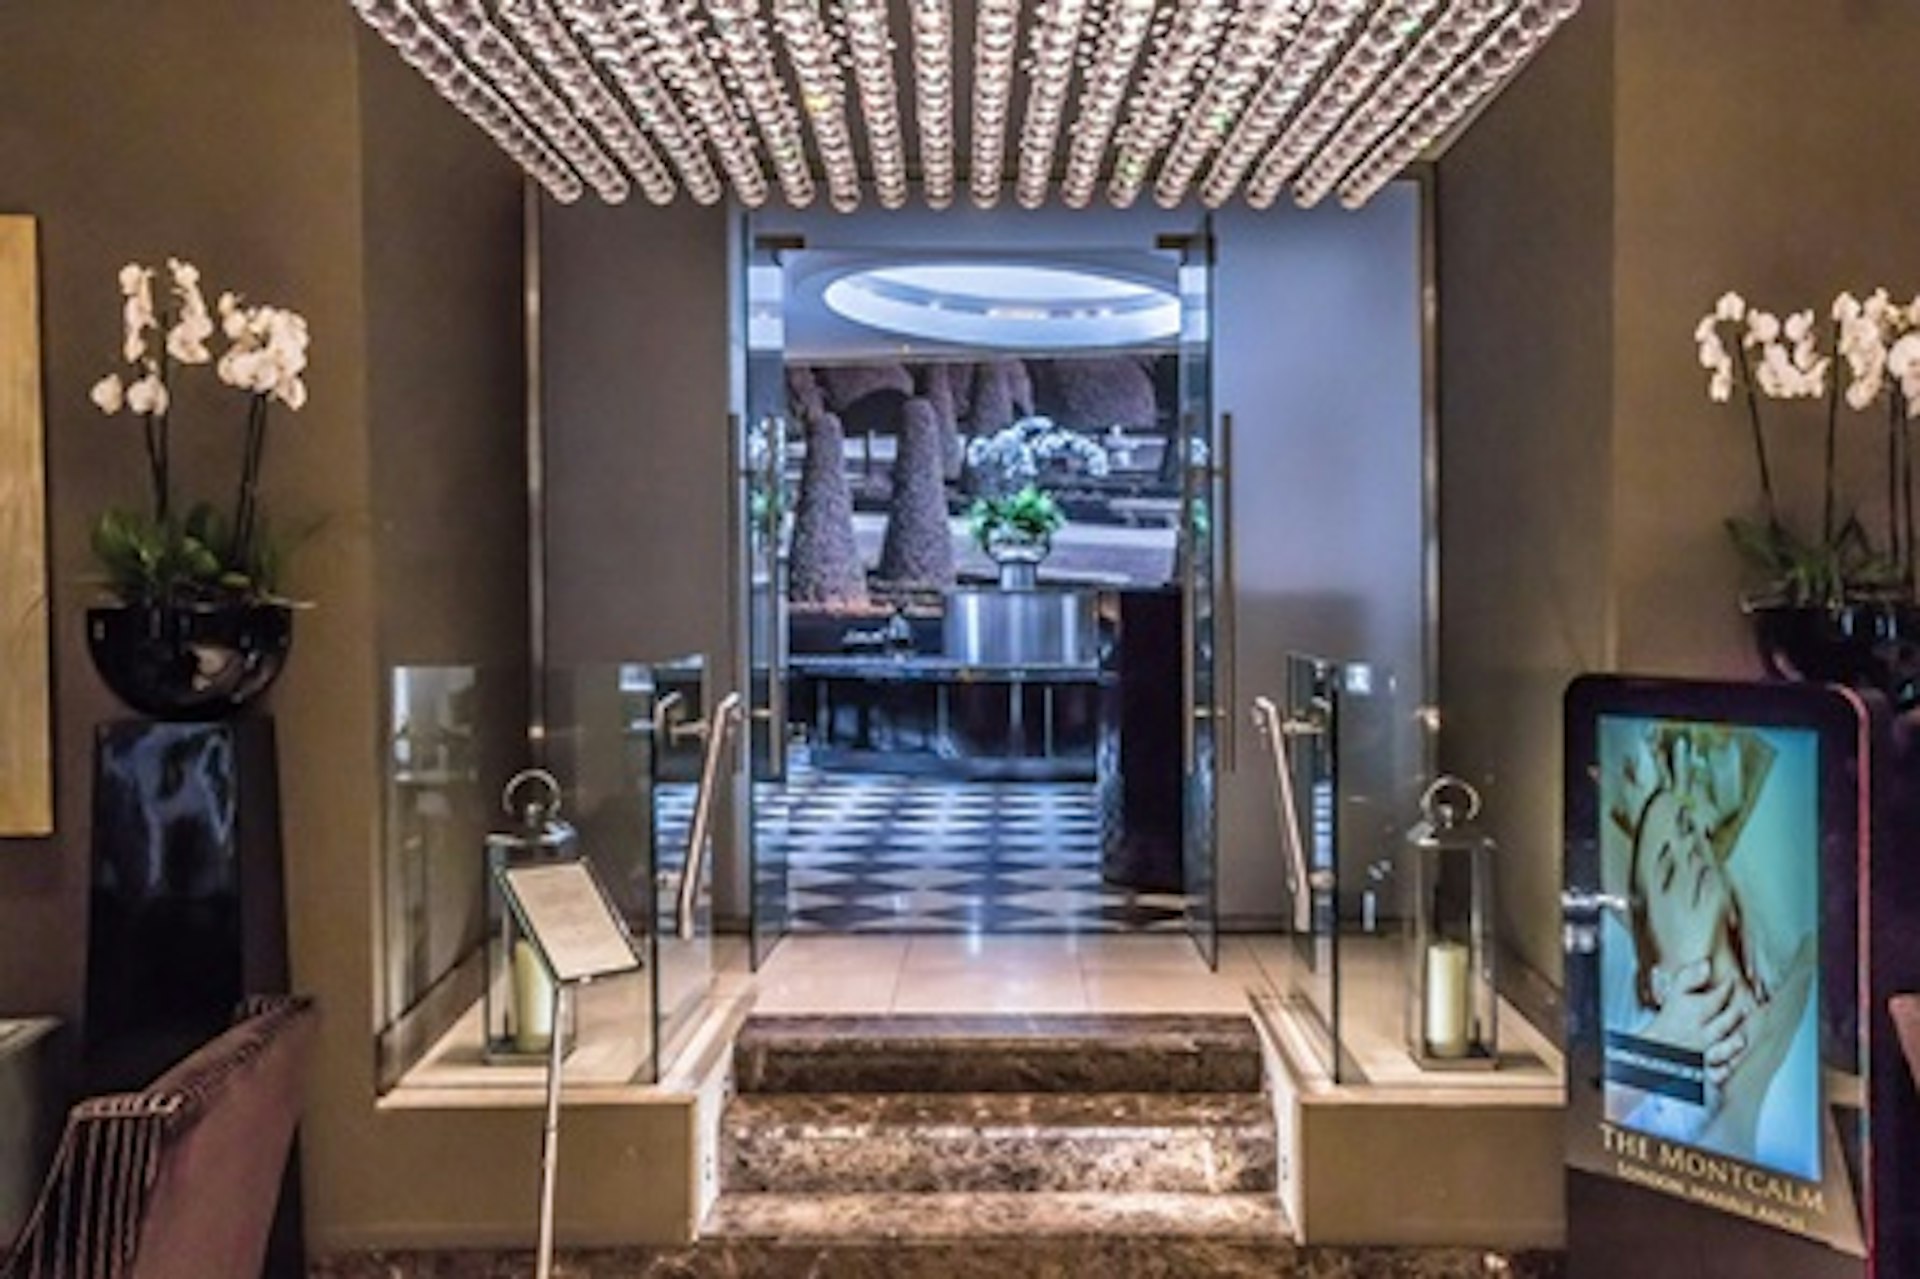 Weekend Spa Relaxation with Treatment and Prosecco for Two at the 5* Montcalm Hotel, London 4